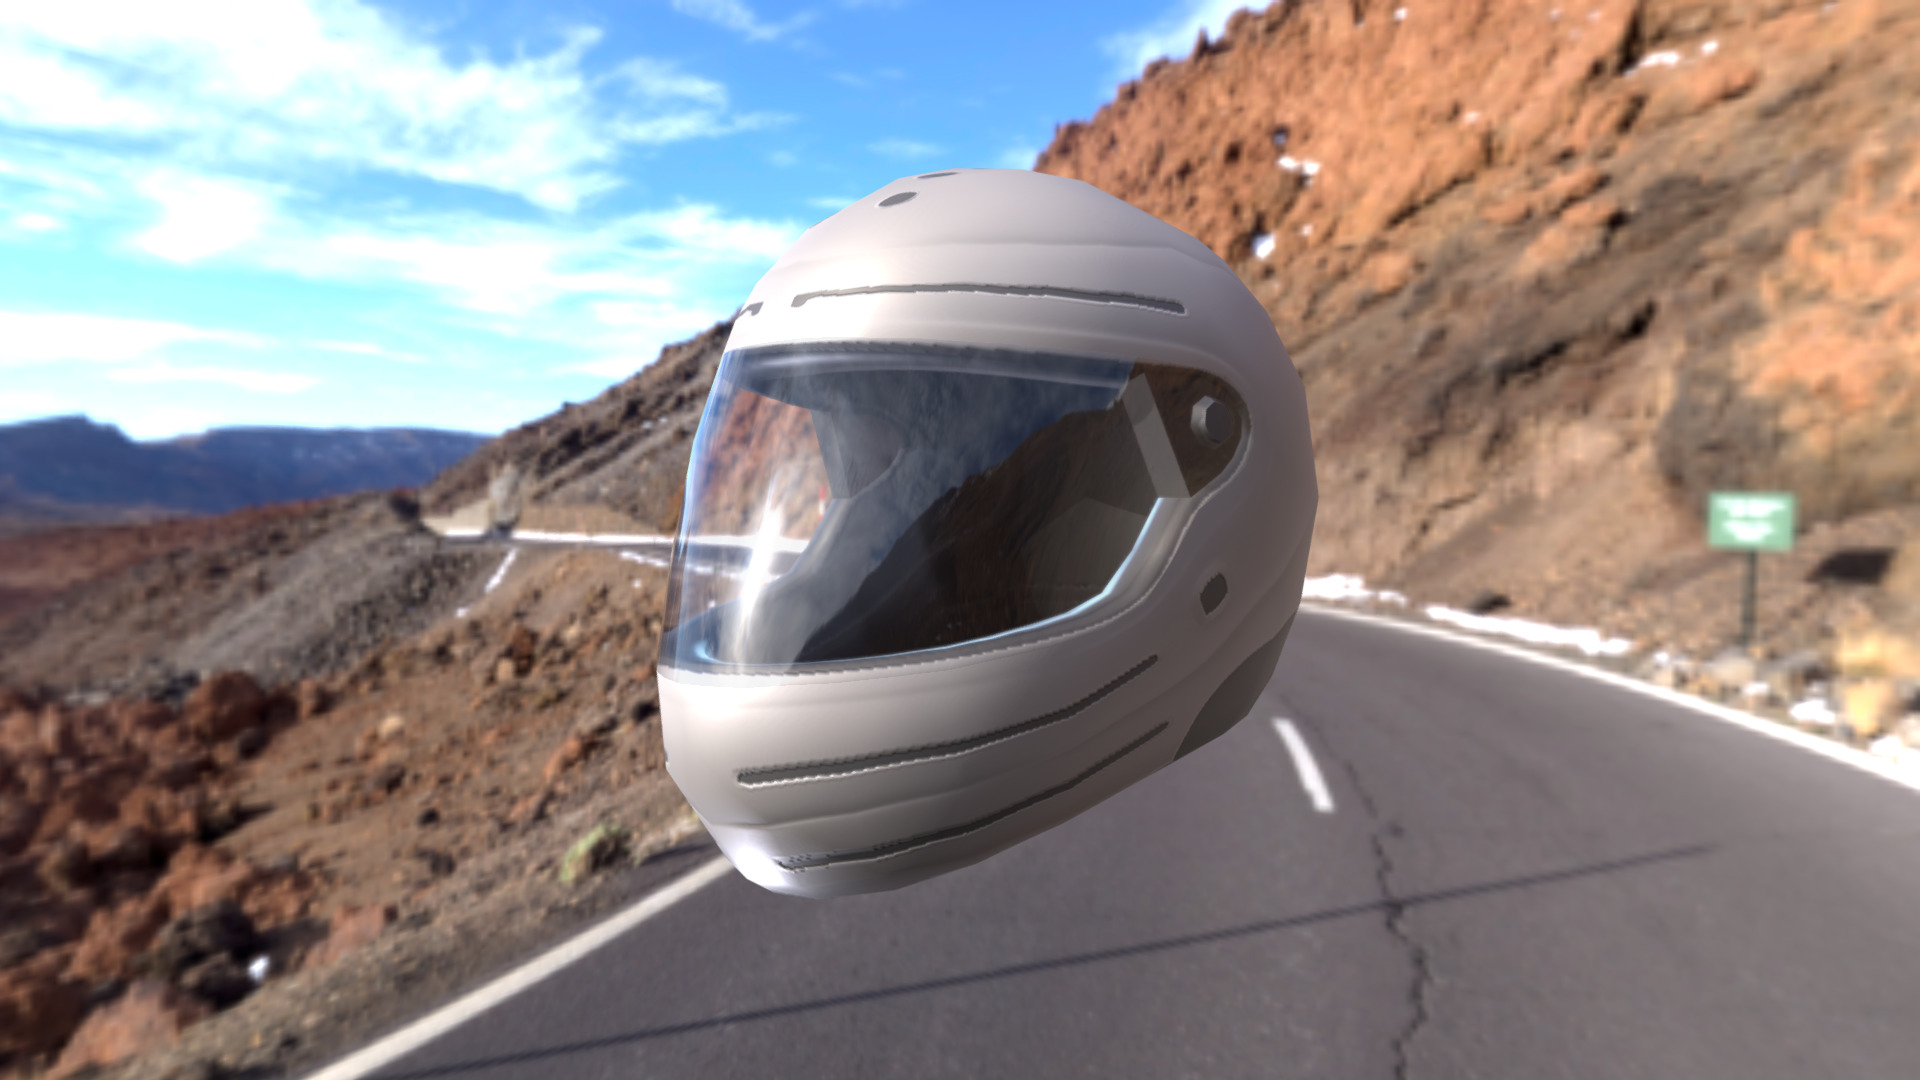 3D model Low-Poly Motorcycle Helmet - This is a 3D model of the Low-Poly Motorcycle Helmet. The 3D model is about a helmet on a road.